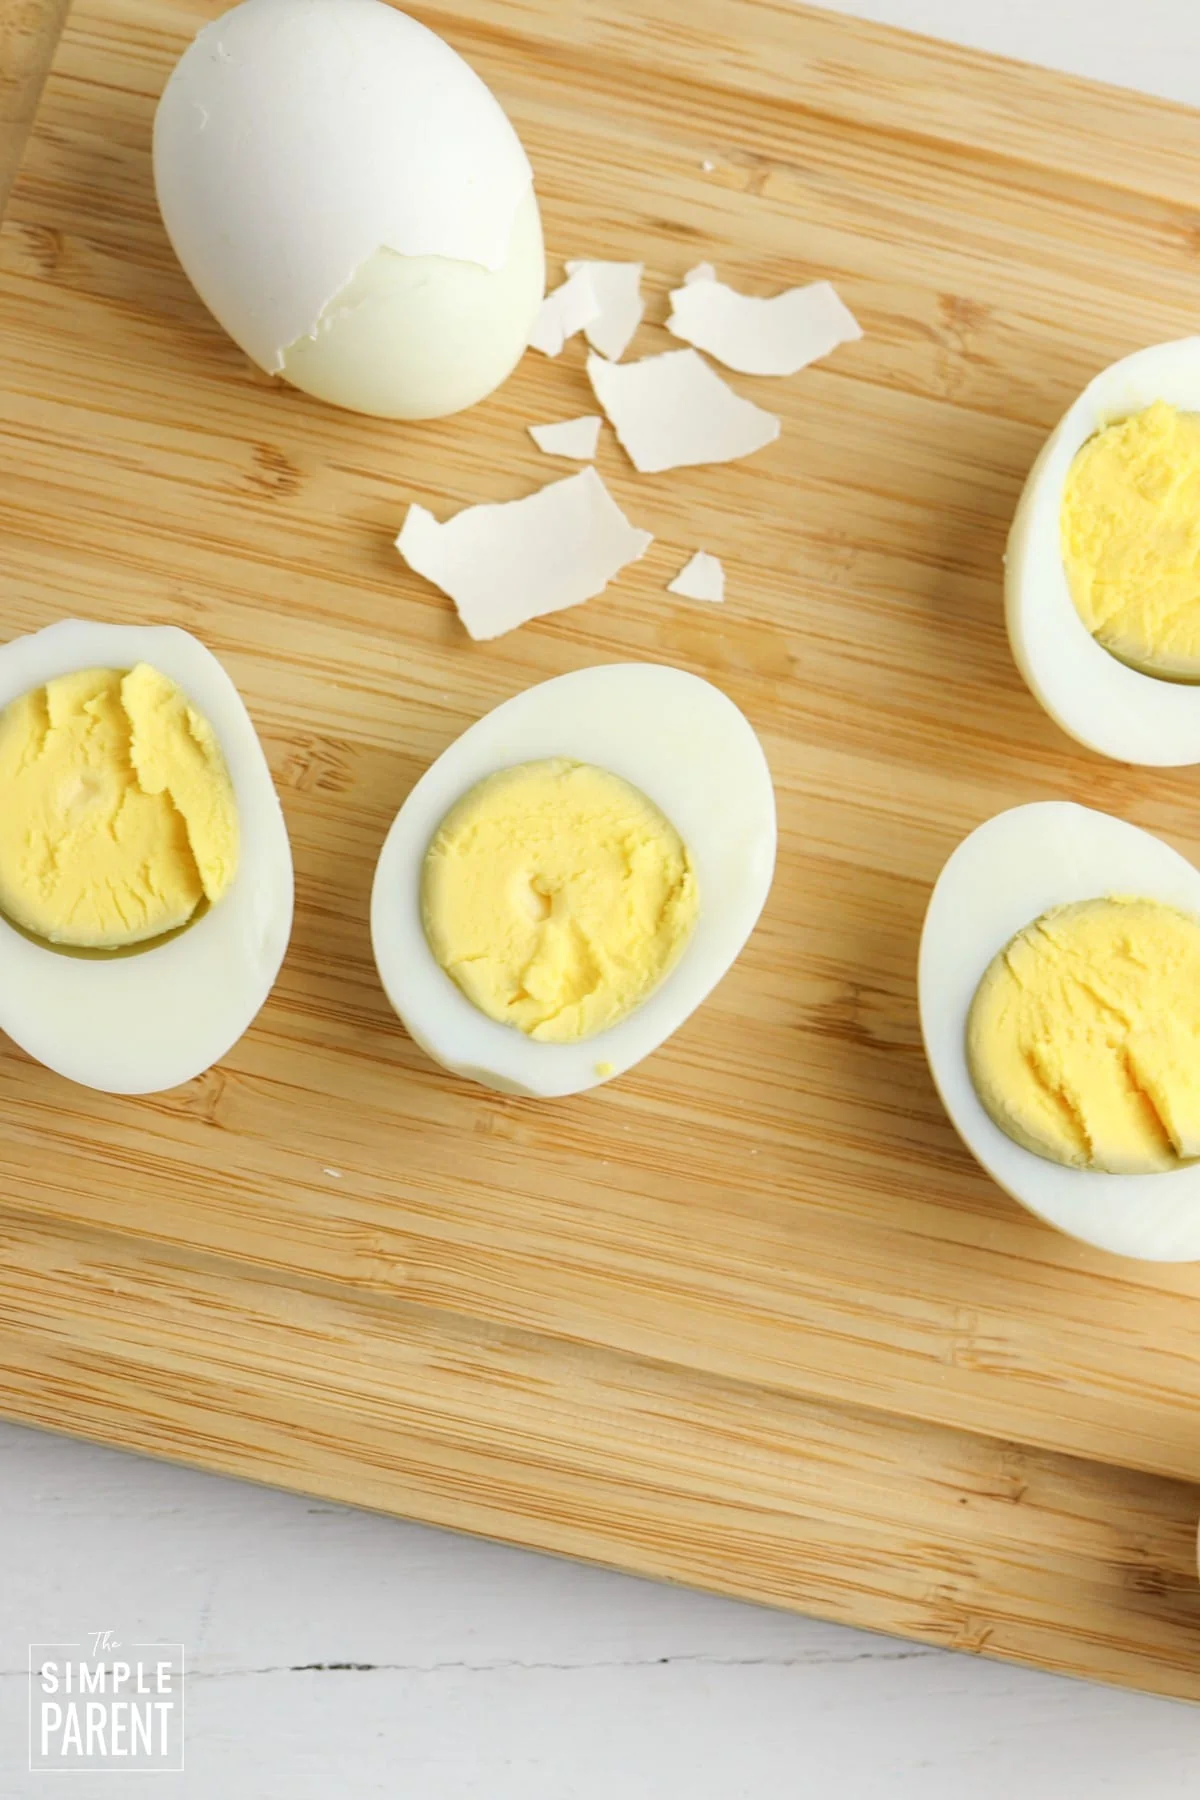 Sliced hard boiled eggs laying on wooden cutting board